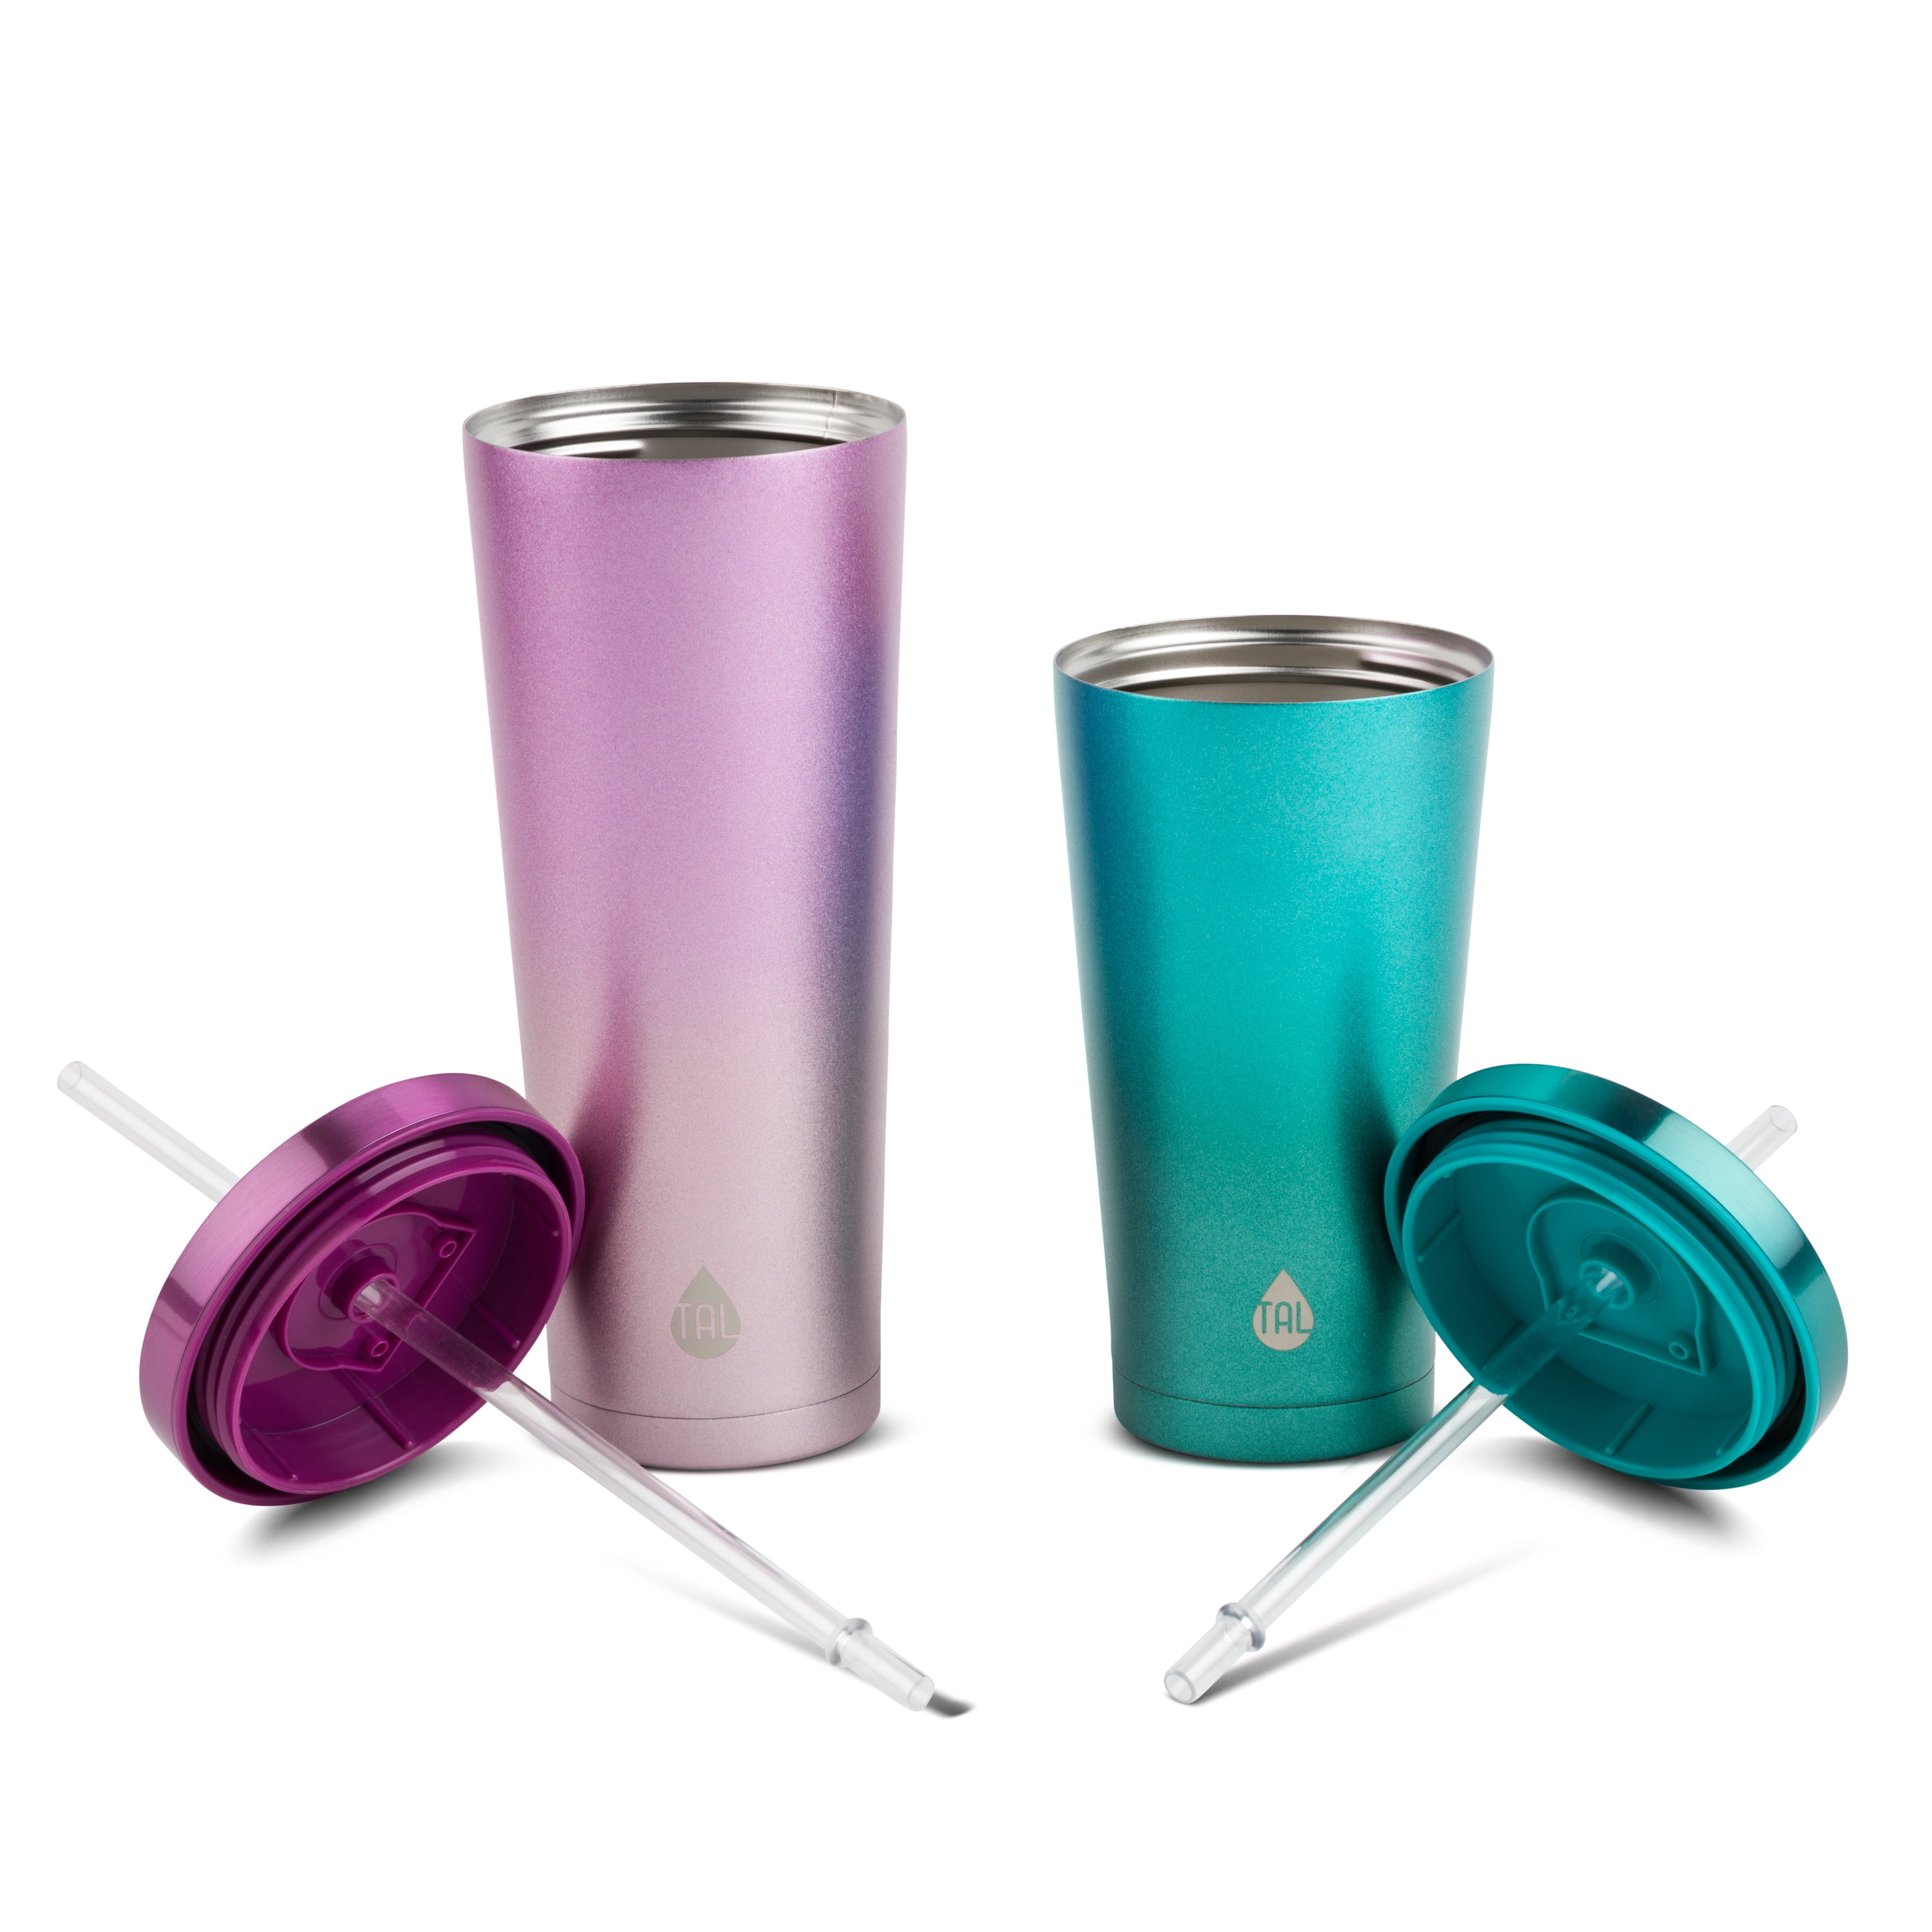 Dropship TAL Stainless Steel Tumbler 25 Oz, Purple Rainbow to Sell Online  at a Lower Price